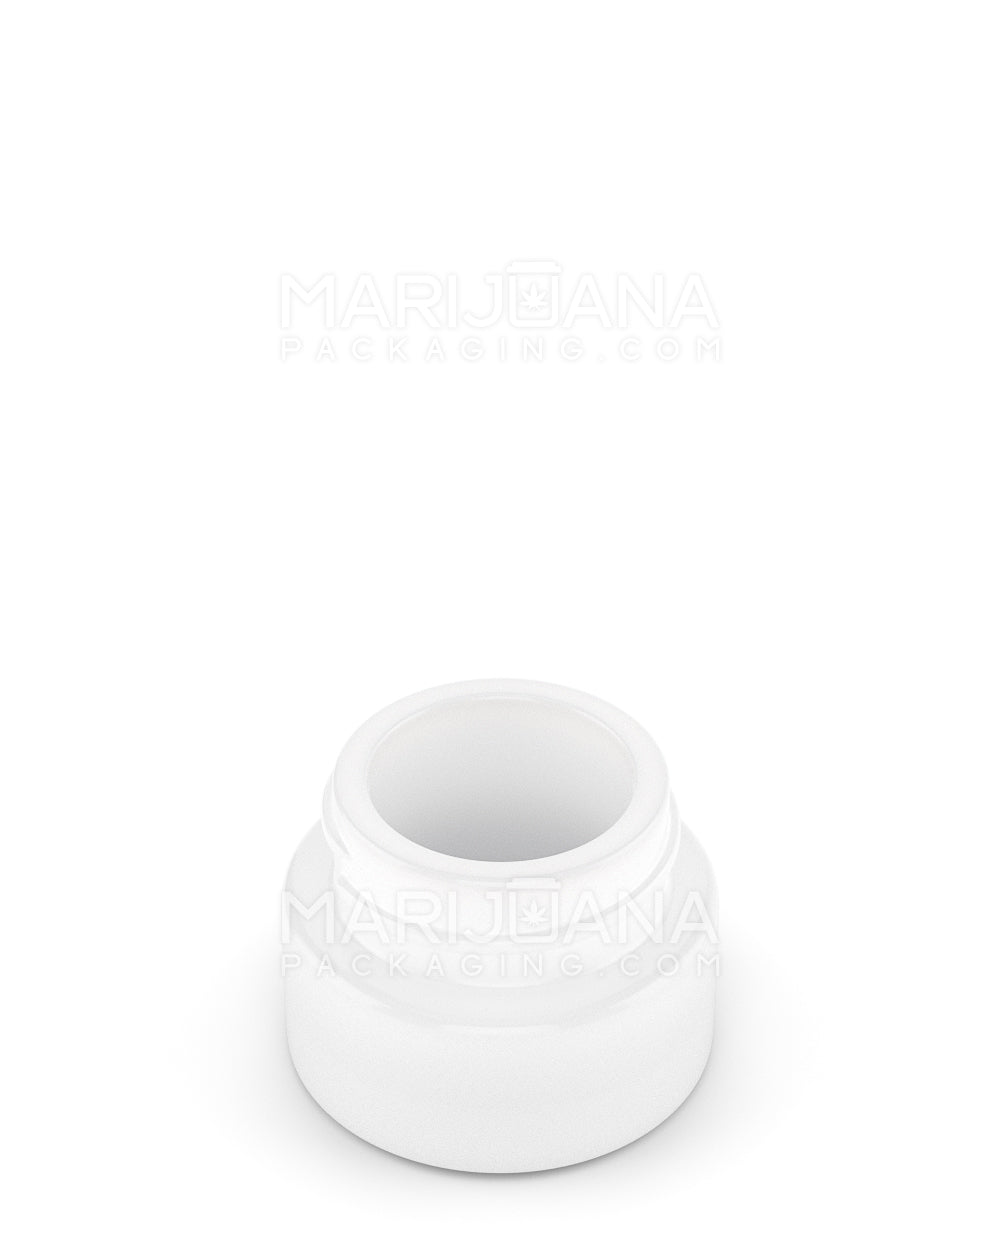 Child Resistant | Glossy White Glass Concentrate Containers w/ Cap | 29mm - 5mL - 504 Count